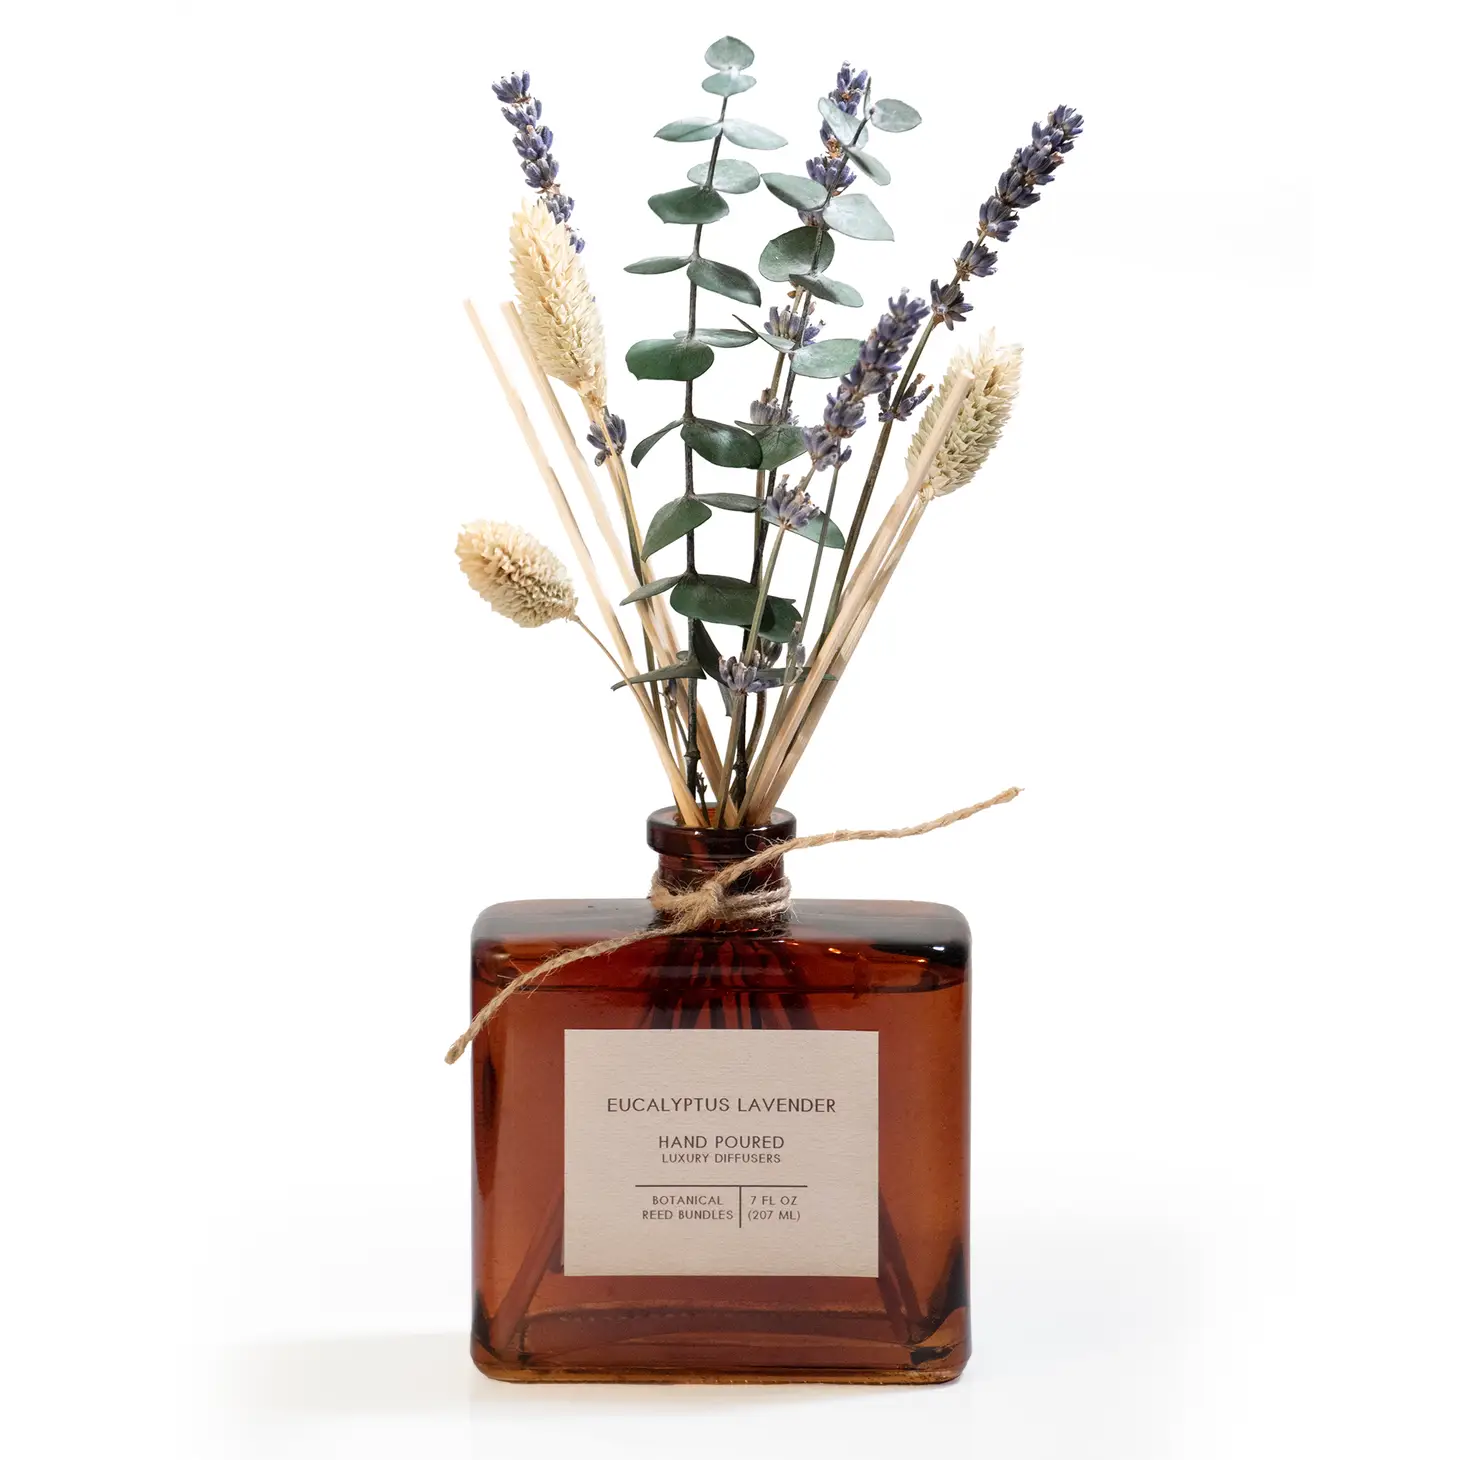 About this product In order to capture the natural beauty of our favorite dried floral stems, we have mixed them in with classic diffuser reeds to create a fragrance diffuser that is both functional and gorgeous! A classic and sophisticated fragrance to fill your home with a modern scent, while the floral stems will add natural beauty. Reed Bouquet ships in acetate box, attached to bottle. Always hand filled in California. 7 fluid ounces. Fragrance notes: Top: cool calone, crushed lavender leaves, aquatic notes. Middle: white eucalyptus, wild lavender, rose. Base: crystal amber, sheer musk, teakwood. Details • Made in United States • Dimensions: 15″ x 15″ x 15″ (38.1 x 38.1 x 38.1 cm) • Weight: 1.5 lb (0.7 kg)